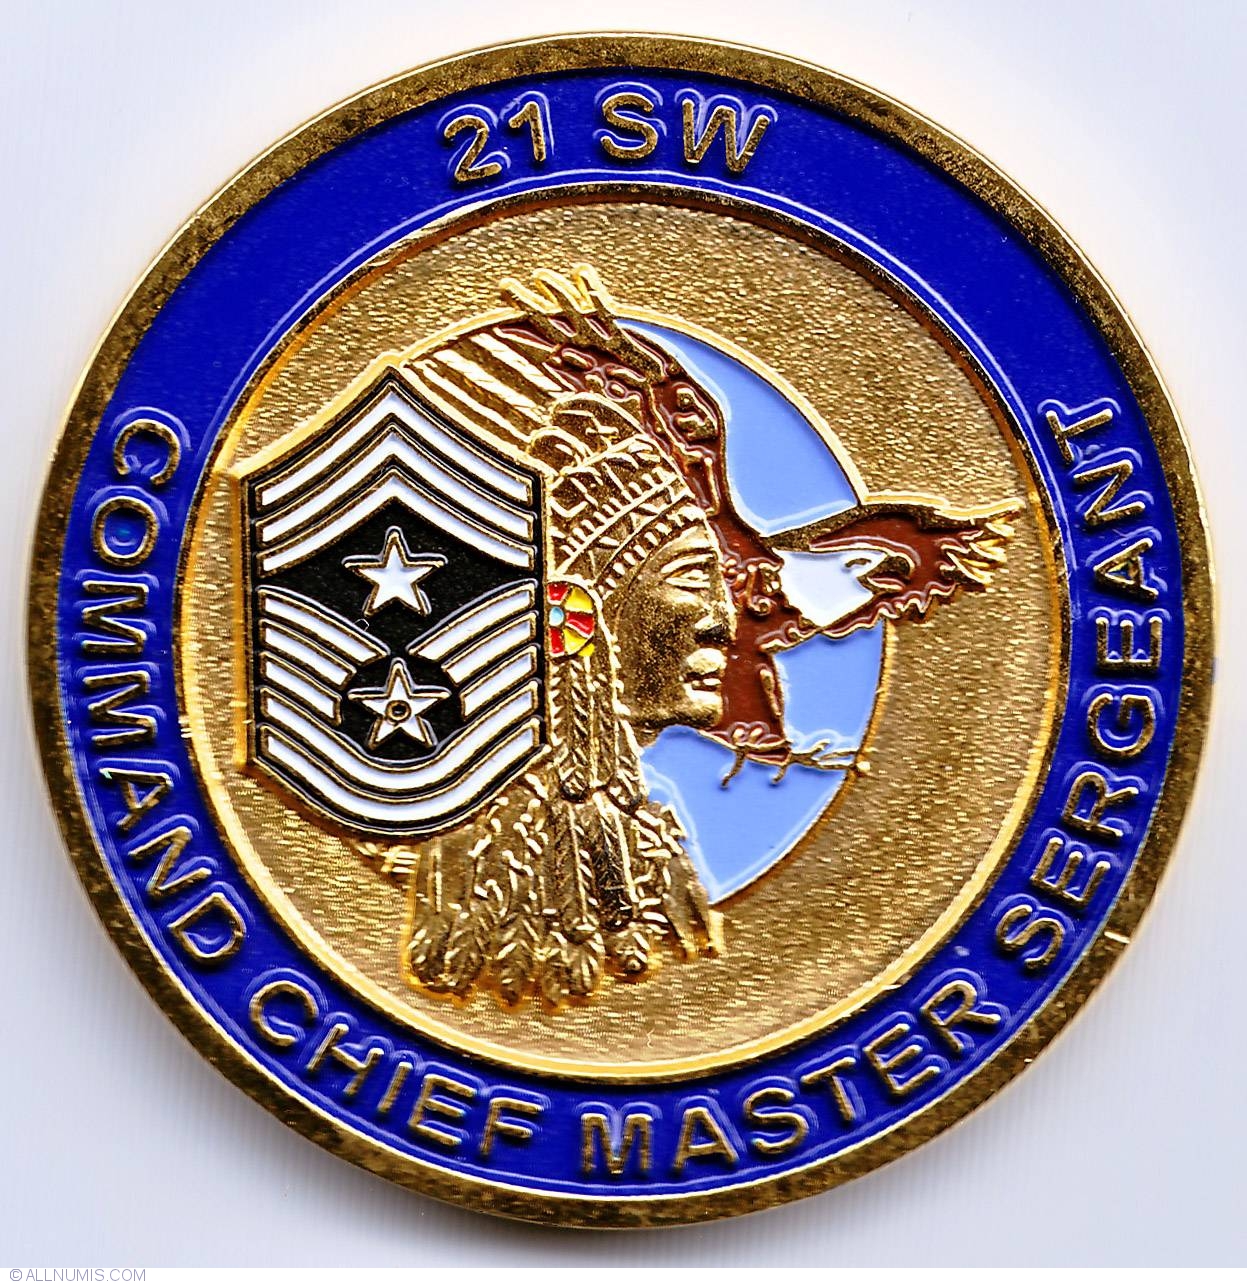 21 Space Wing Command Chief Master Sergeant, Military Challenge coin -Air Force ...1247 x 1284